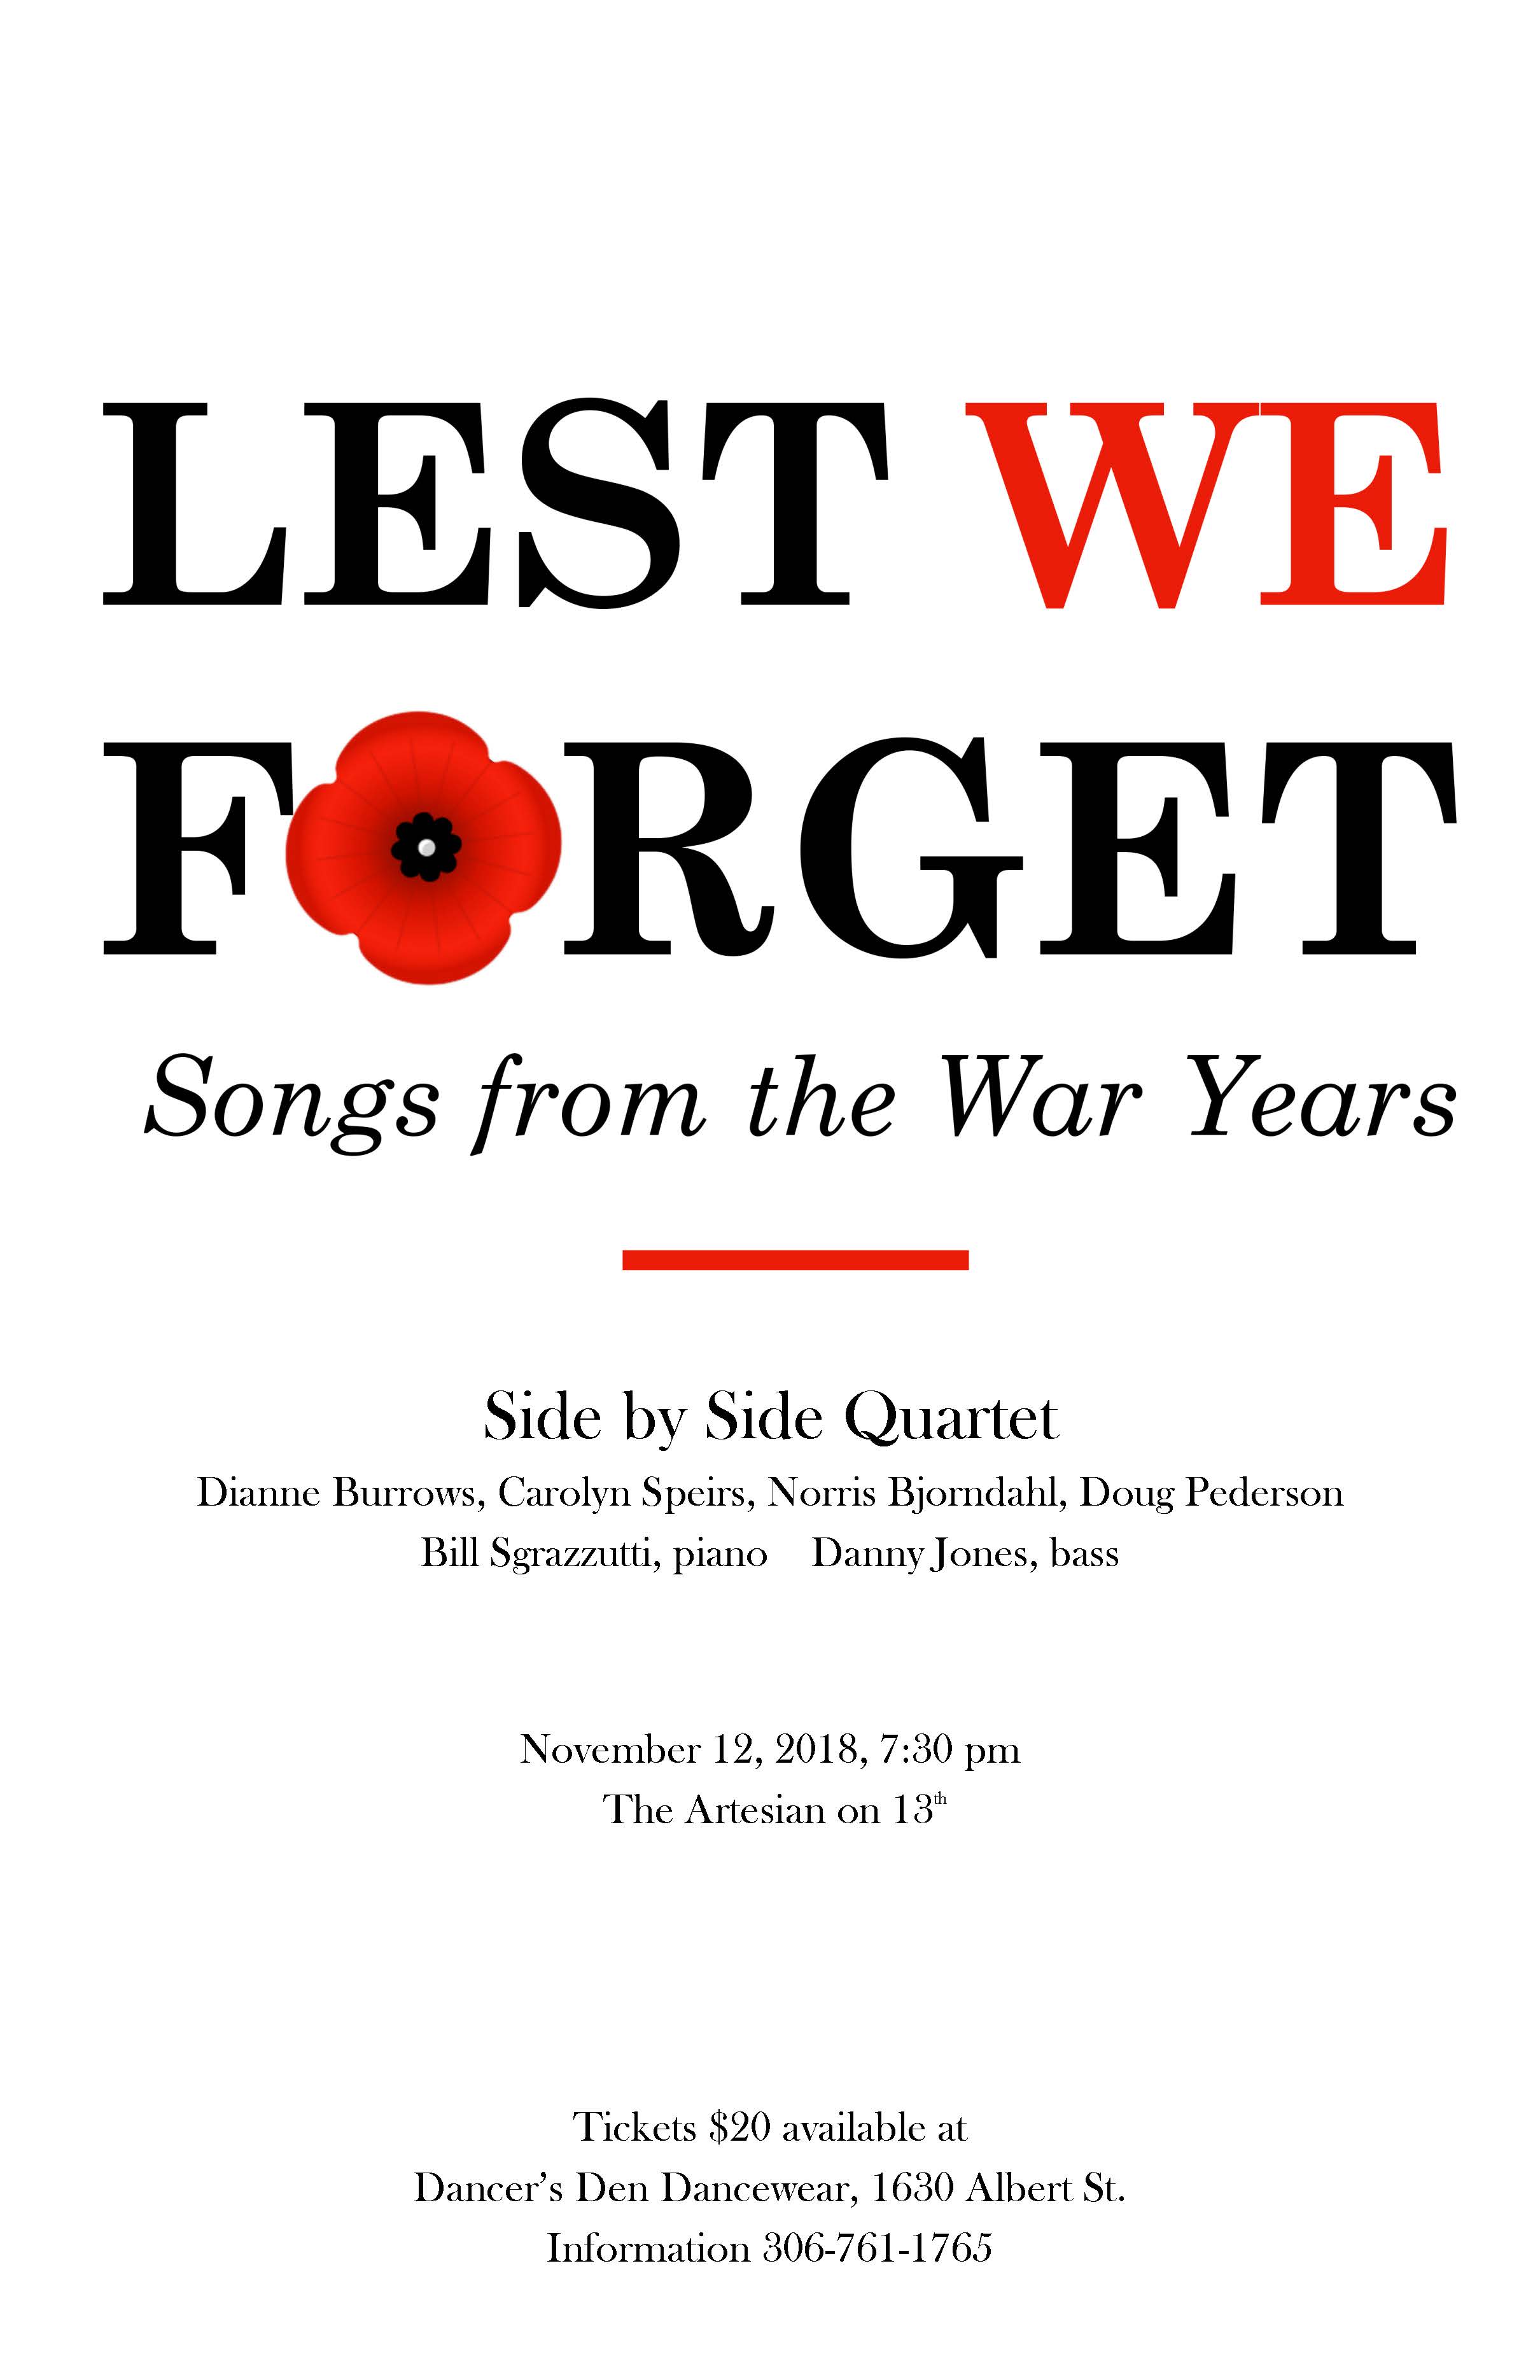 Lest We Forget - Songs From the War Years